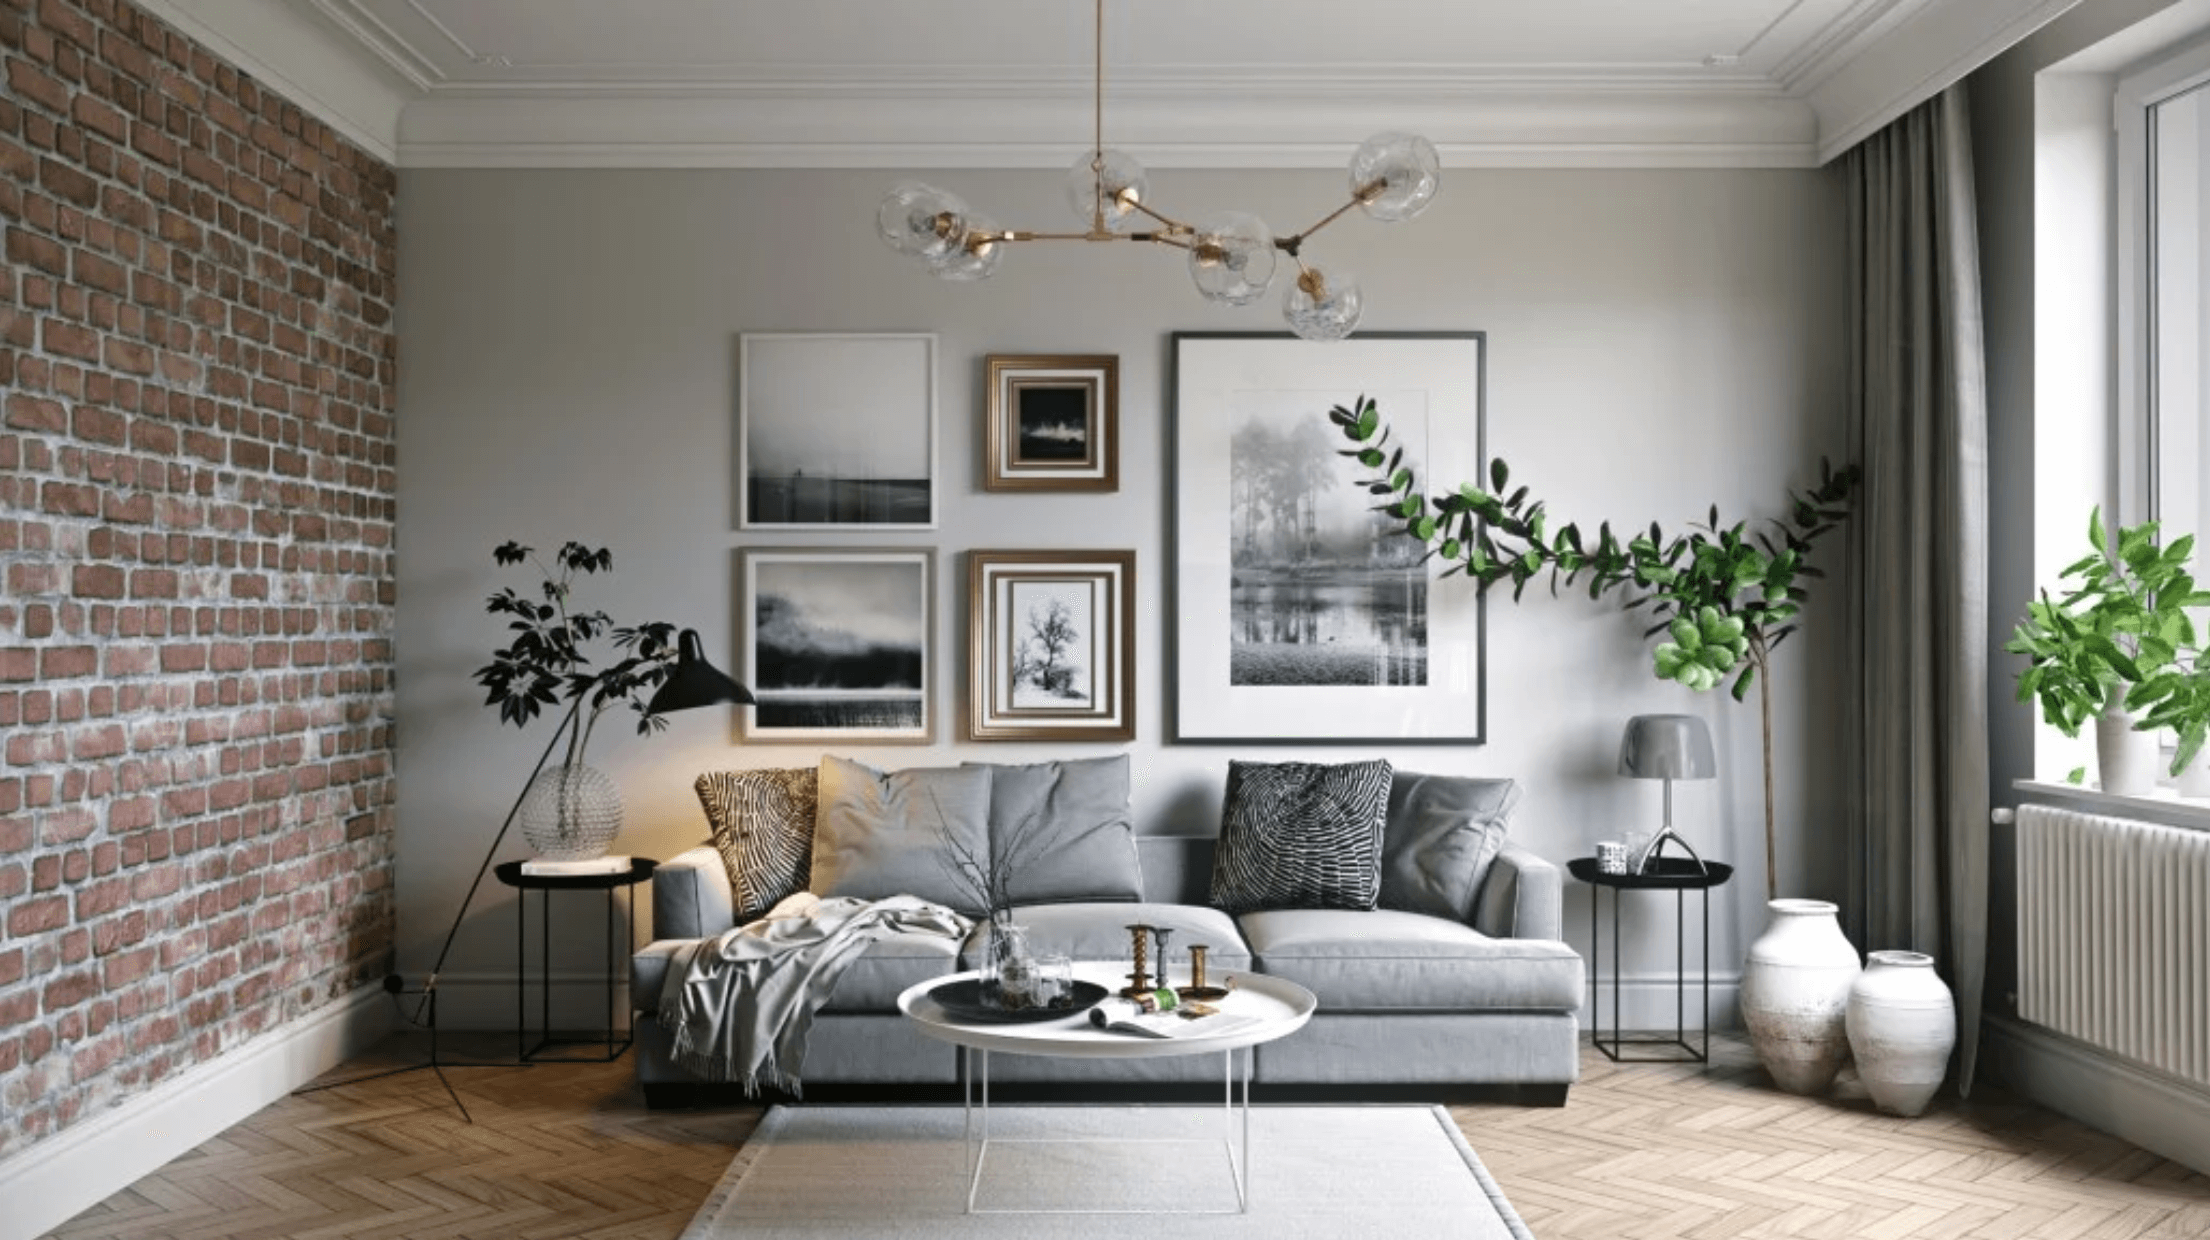 Living Room Interior Decorating: Style Your Space To Perfection